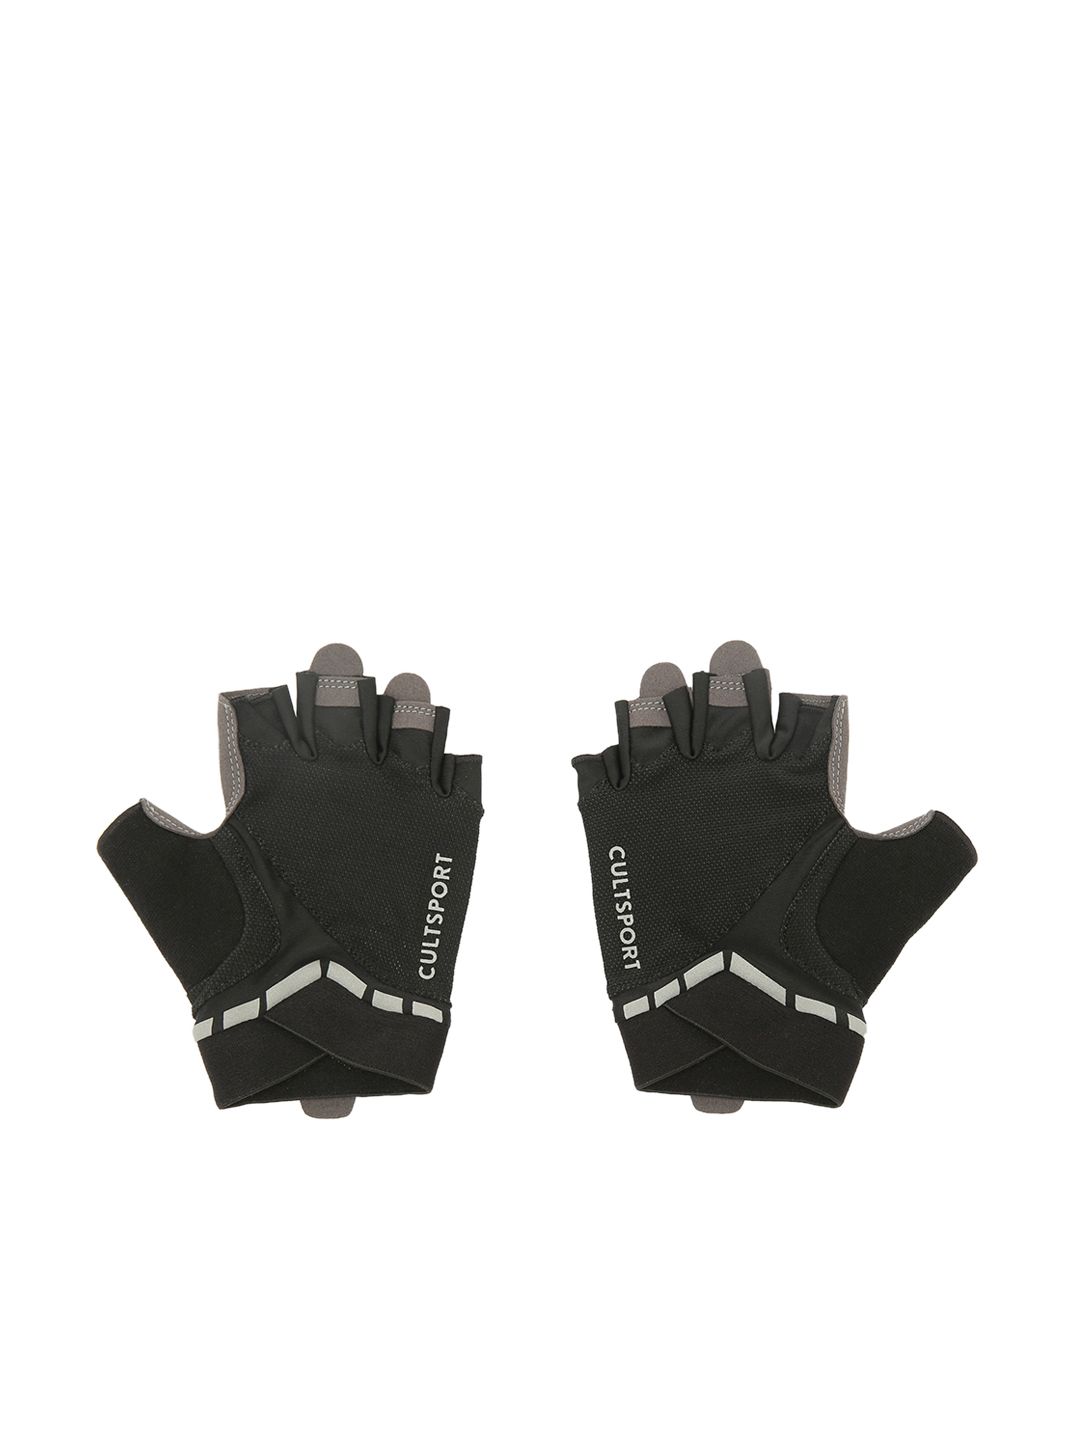 Cultsport Unisex Black & Grey Training Workout Gloves Price in India